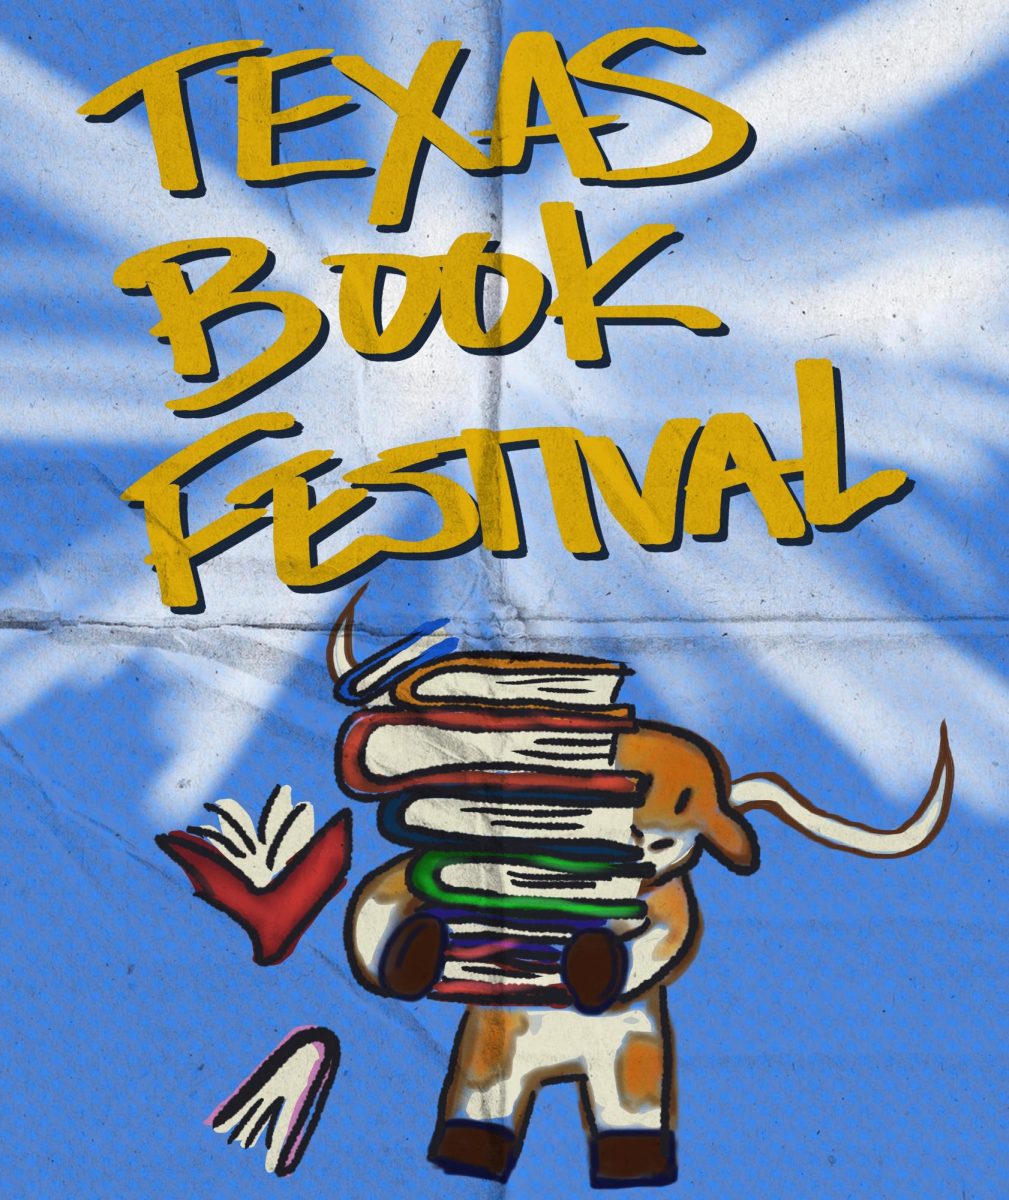 The Daily Texan’s guide to Texas Book Festival